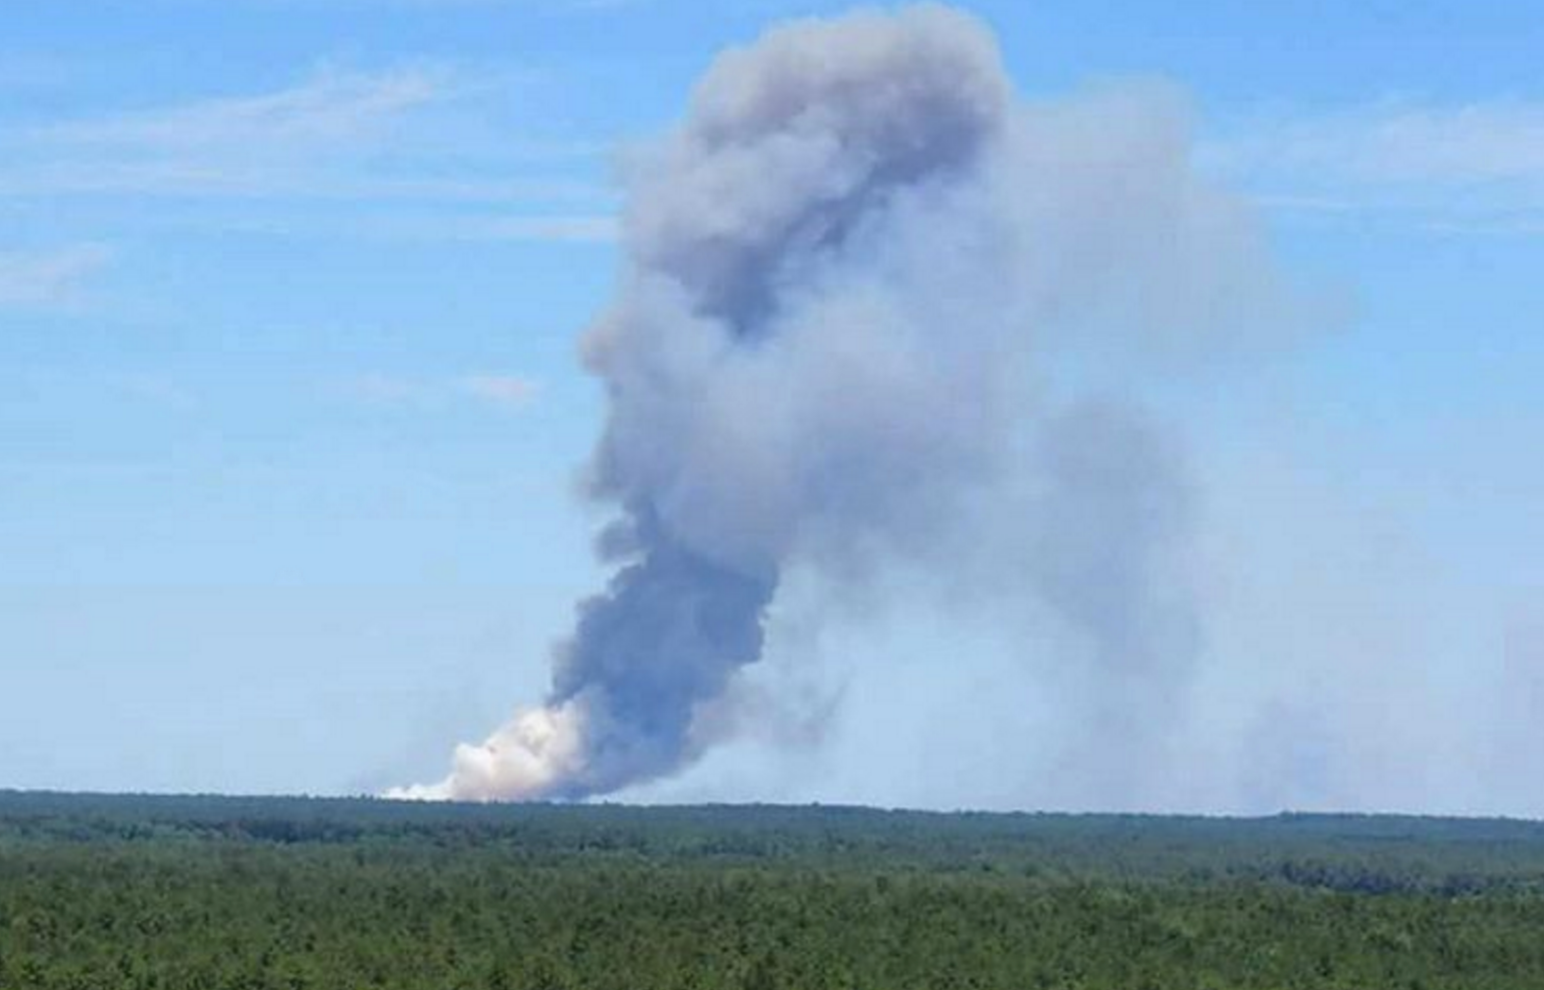 The smoke plume from the Joint Base wildfire as spotted by JSHN Instagram contributor @susiesunshine13 from Wharton Forest's Apple Pie Hill fire tower.